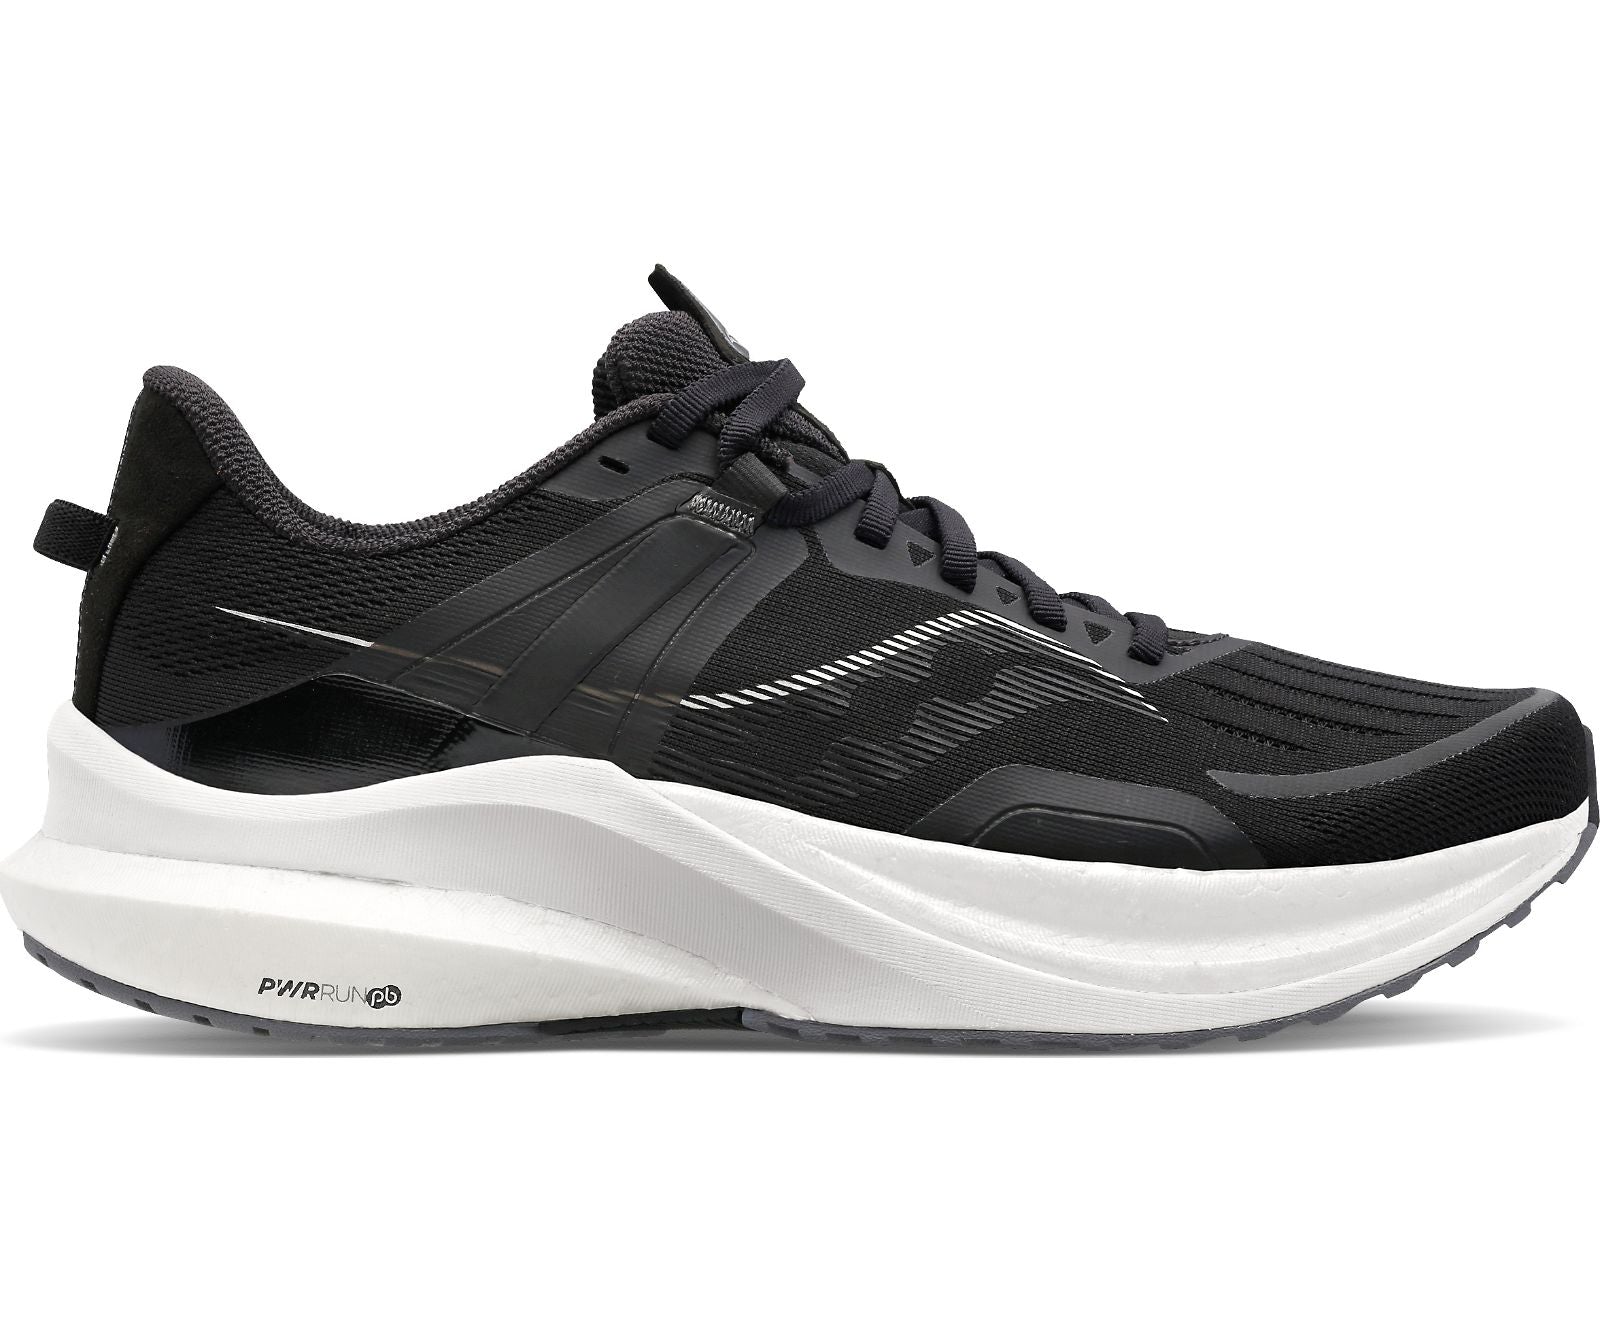 Lateral view of the Women's Tempus by Saucony in the color Black/Fog